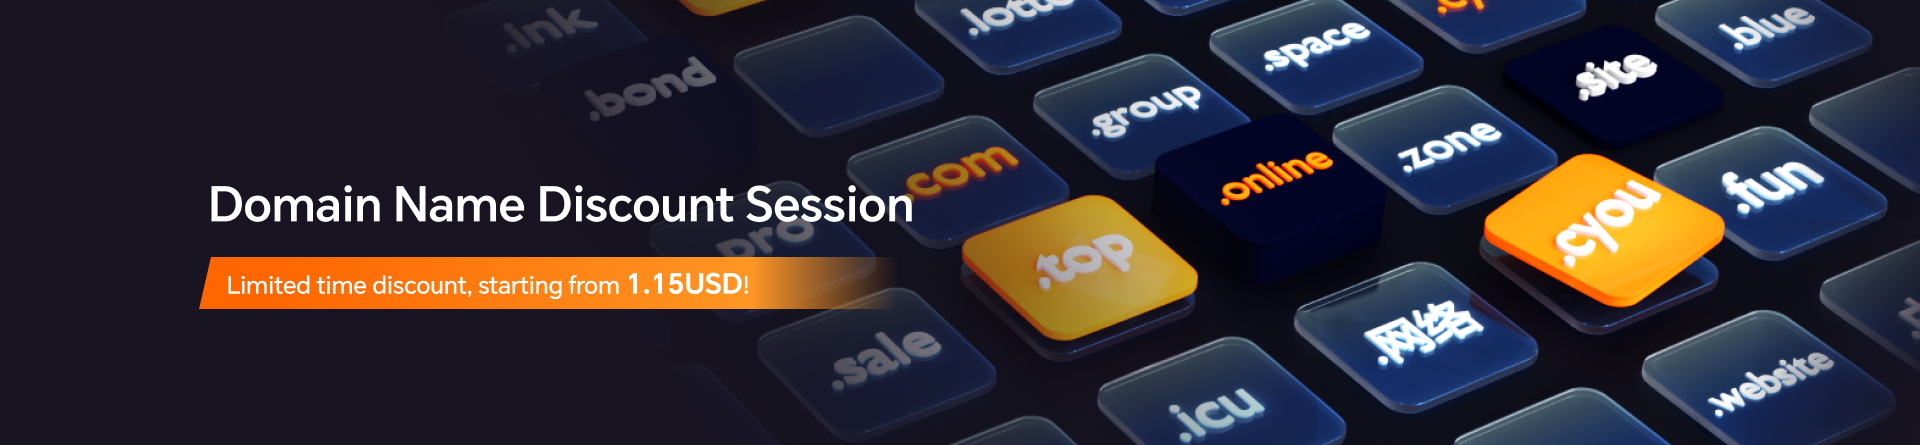 Domain Name Discount Session